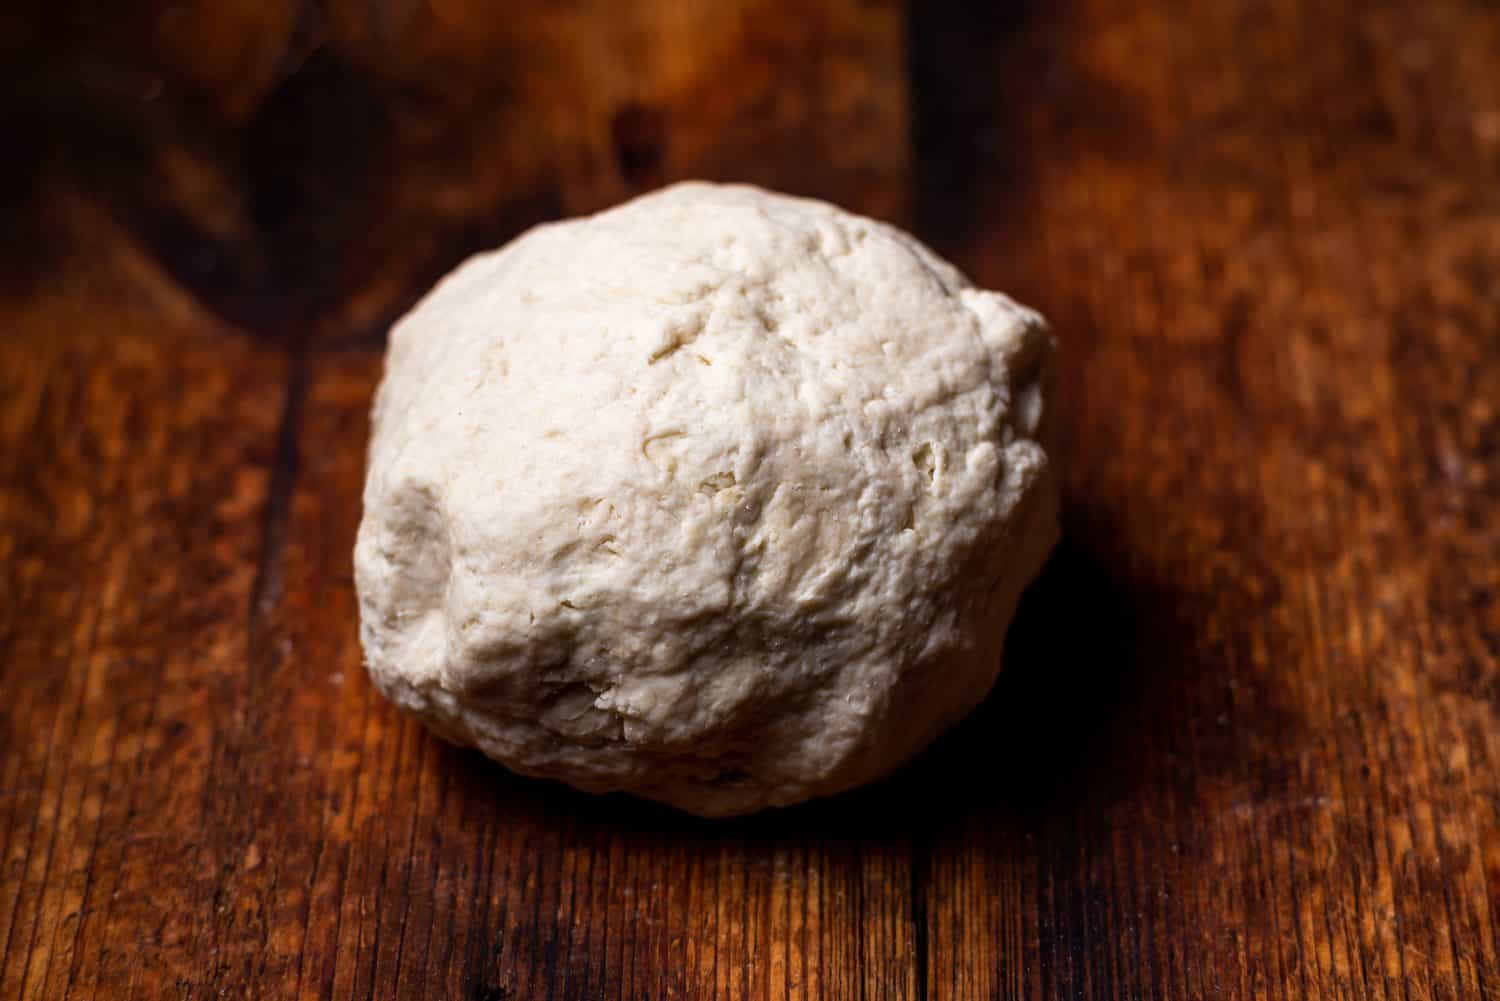 Ball of dough on wooden surface. Preparation of shiver dough for making bread, base for pizza, baguettes